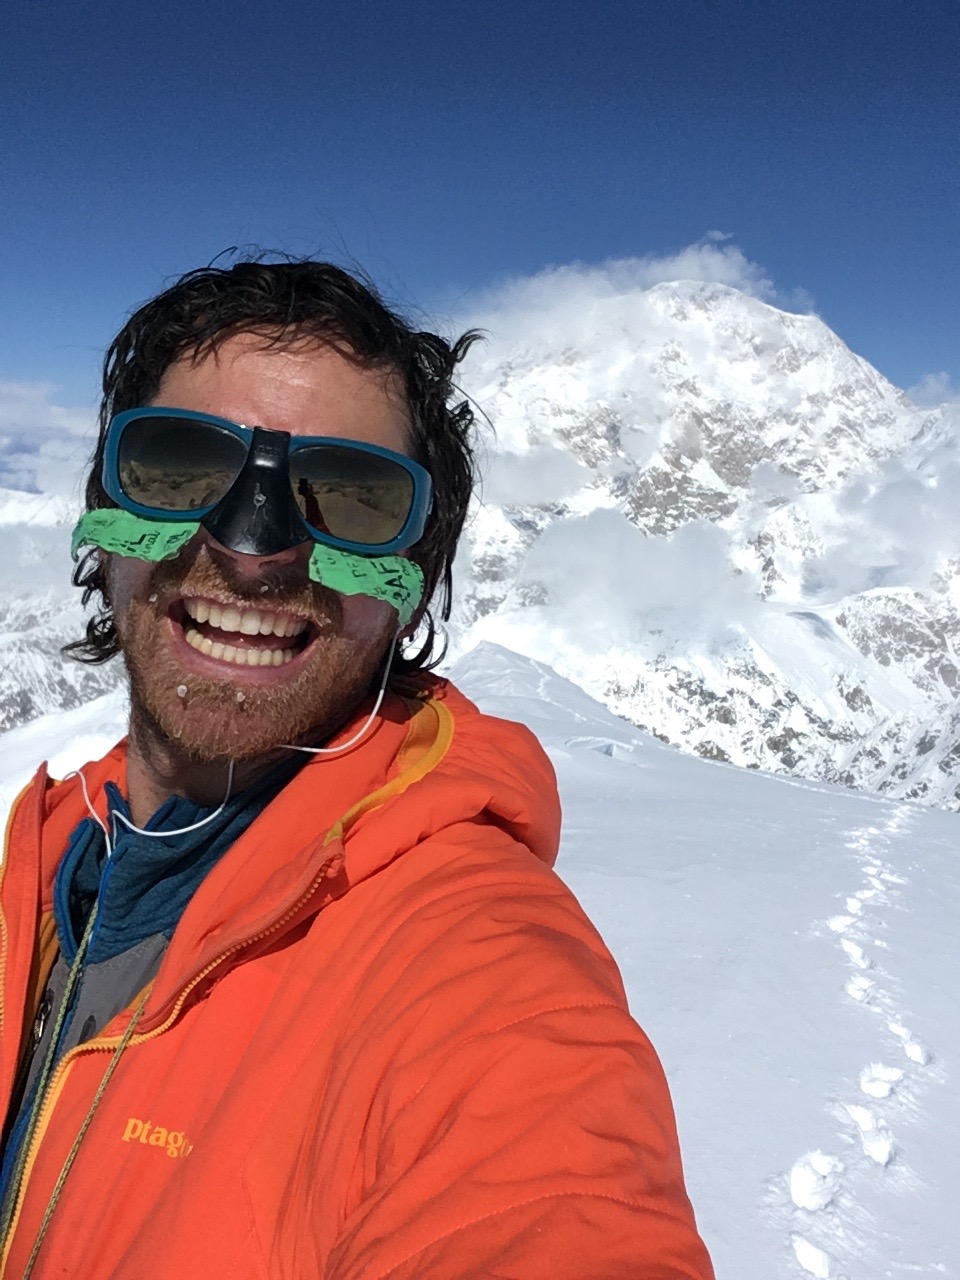 Self-portrait on the summit of Begguya (14,573'). Denali (20,310') is in the background. [Photo] Colin Haley